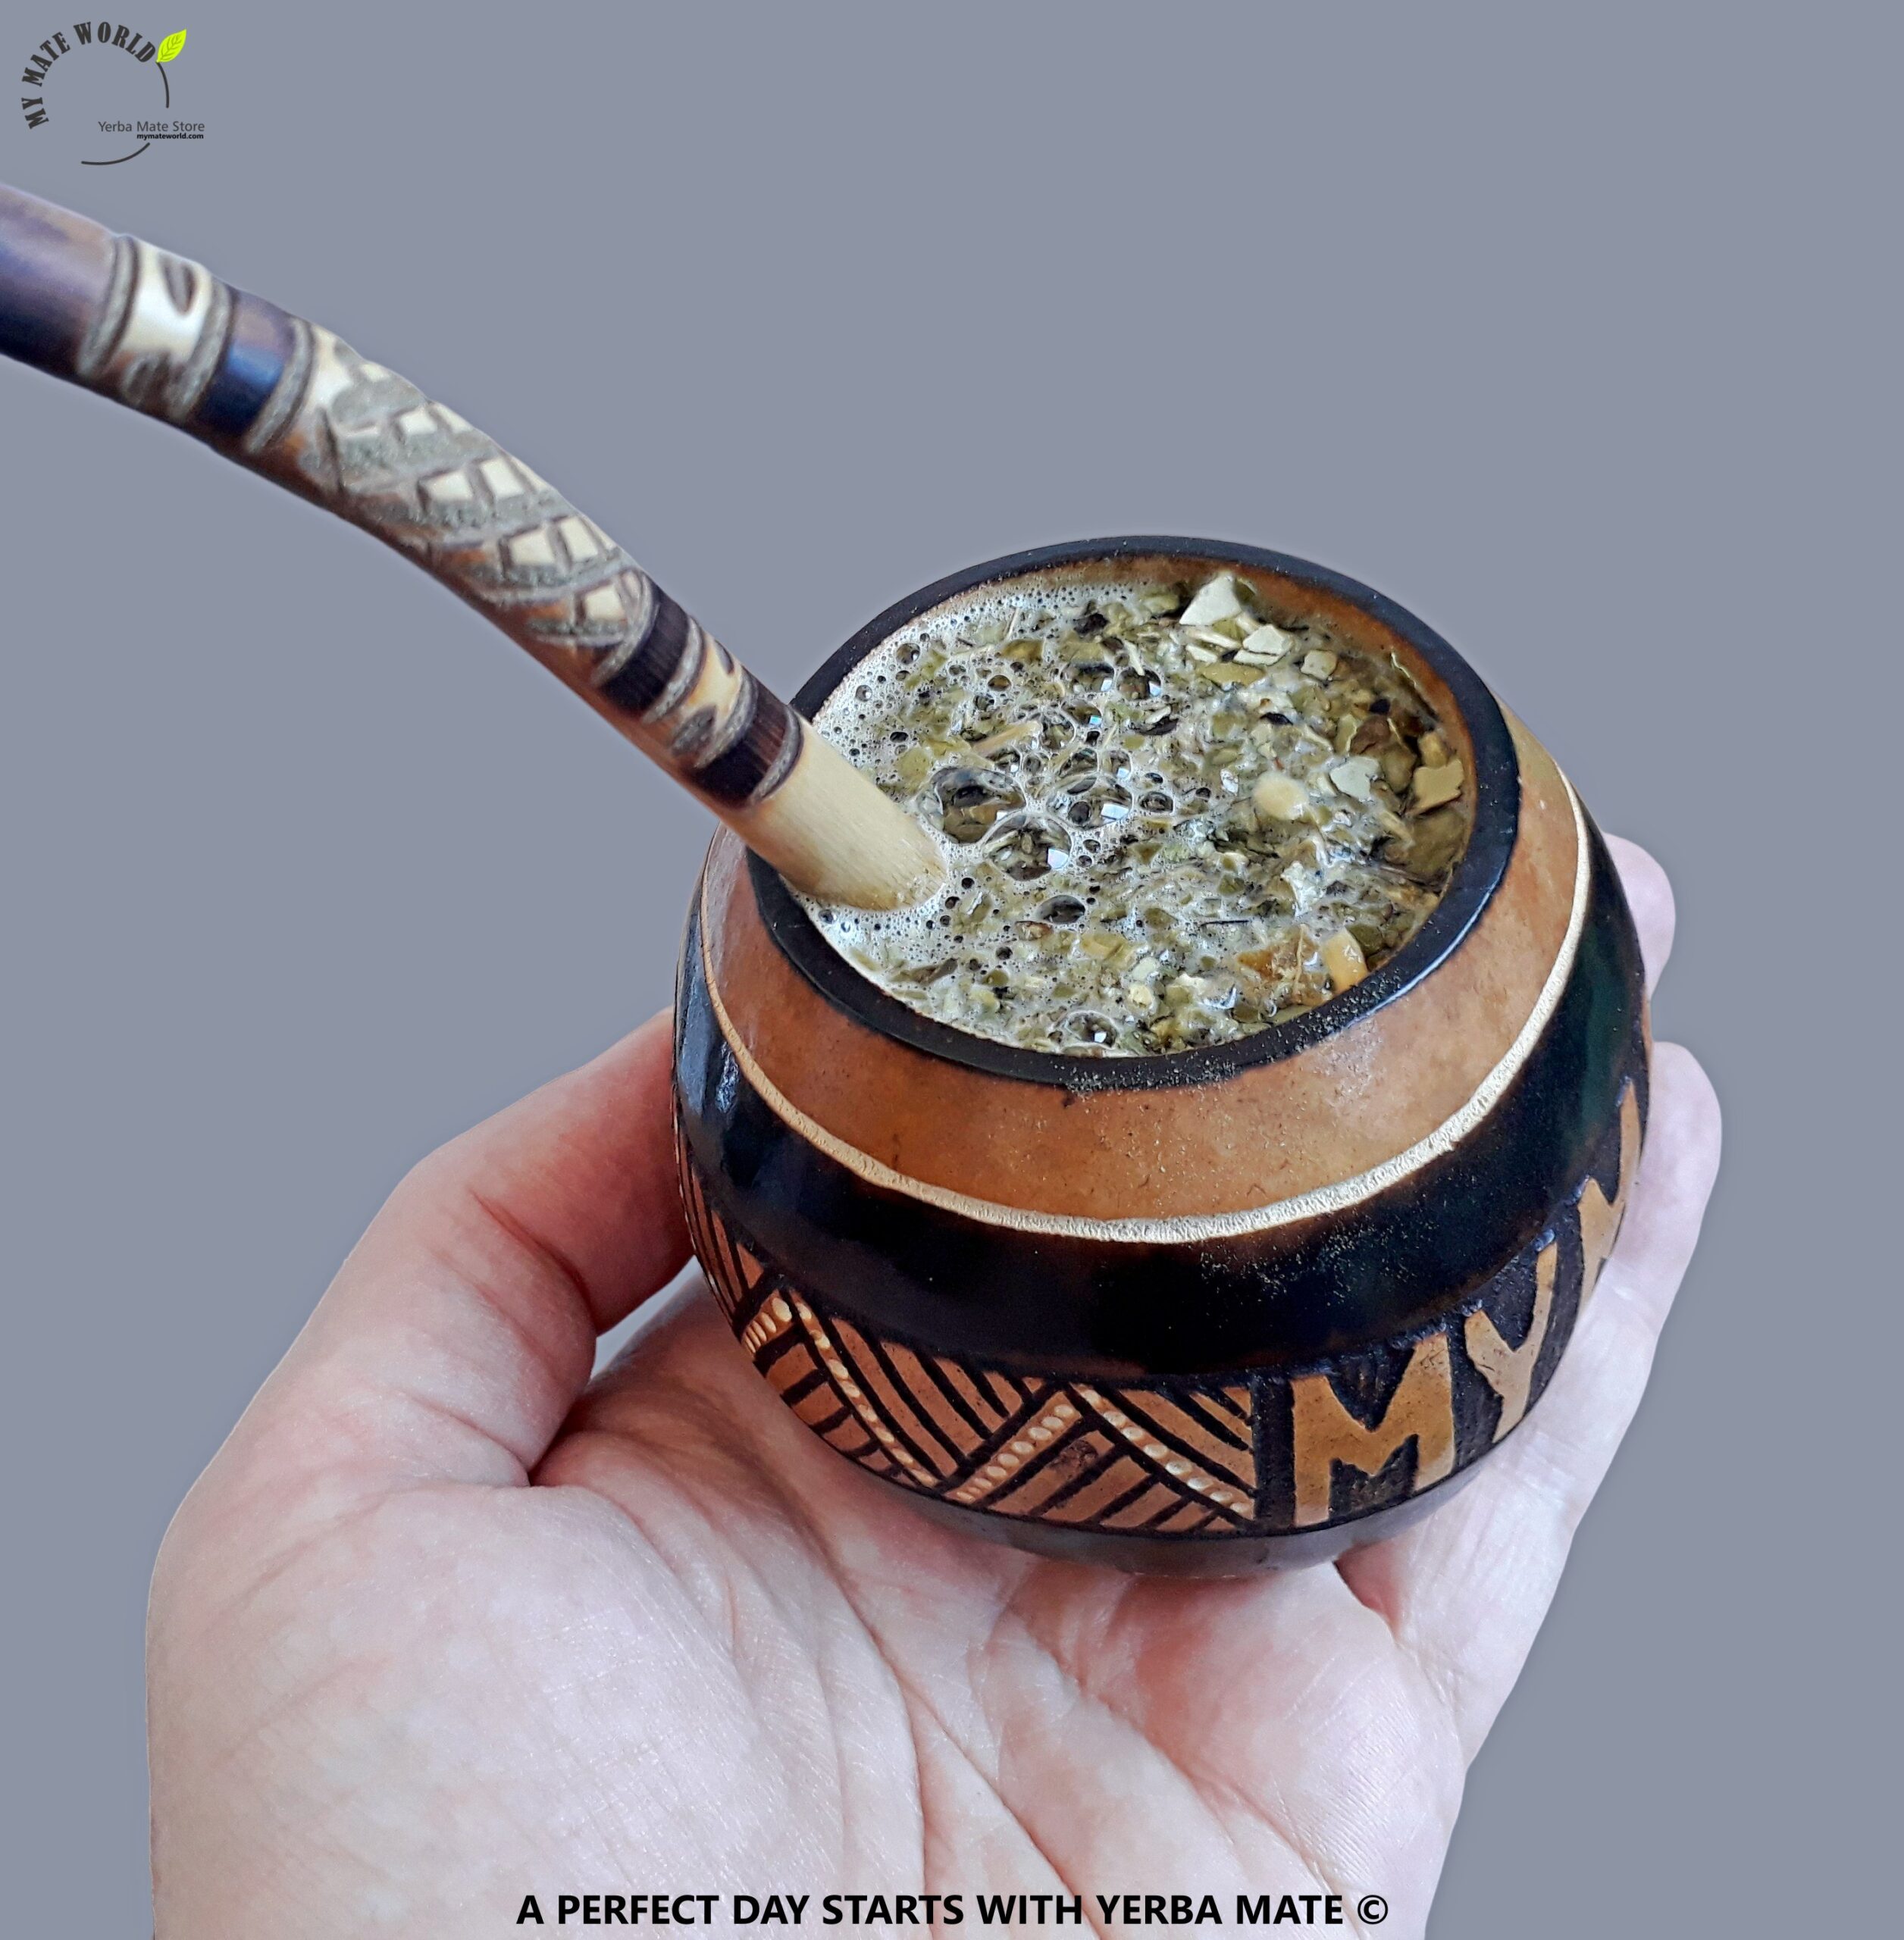 Traditional Yerba Mate brewed in a gourd